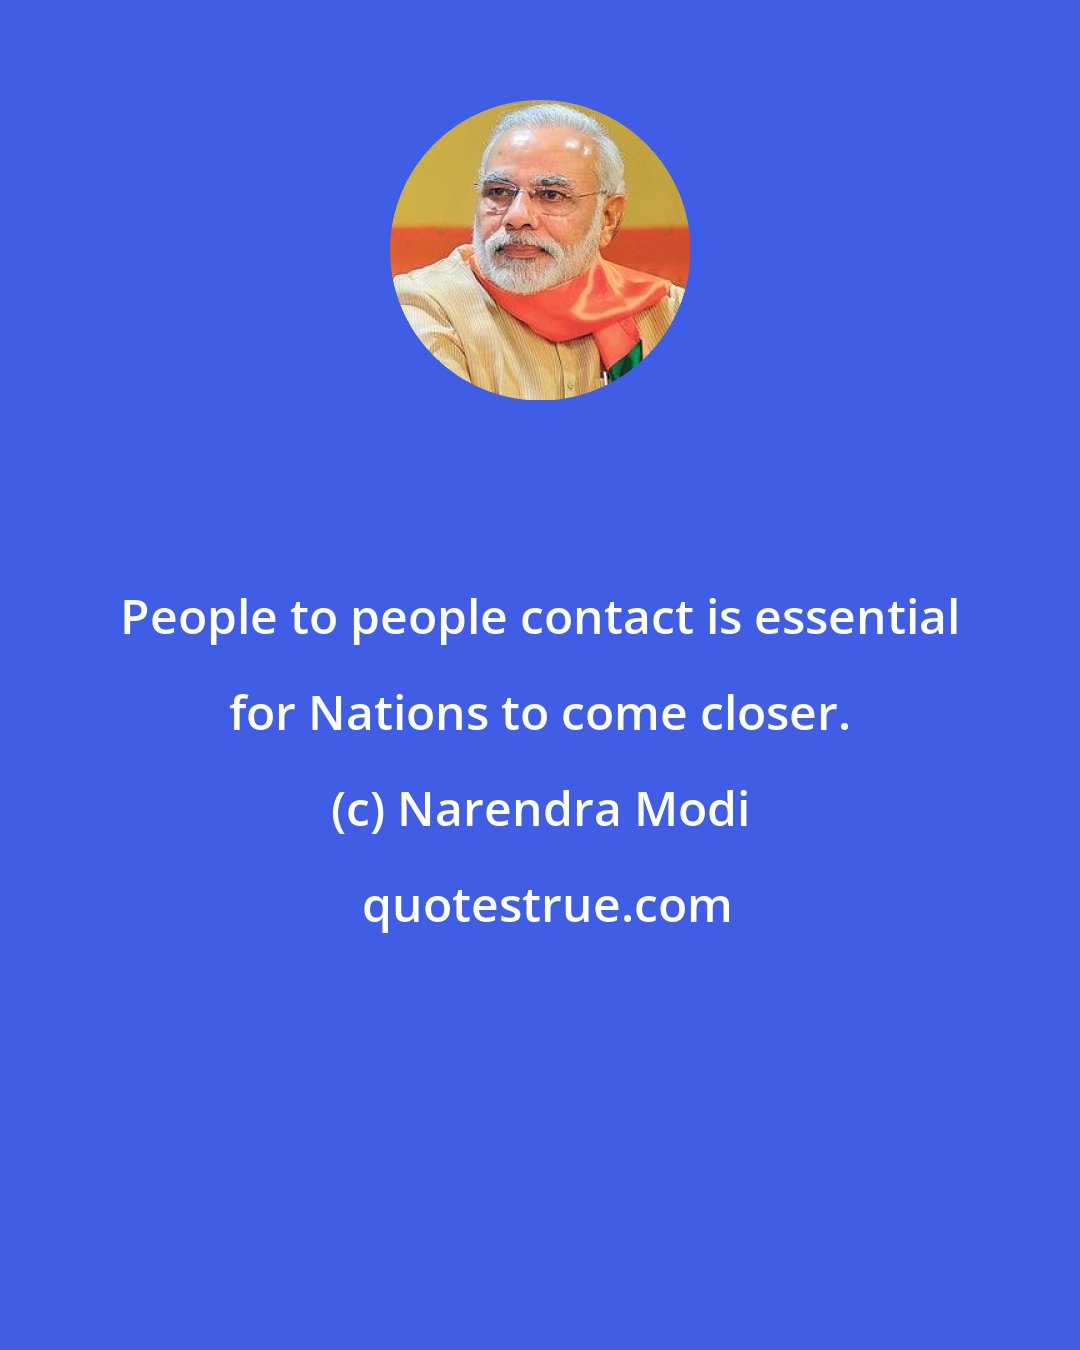 Narendra Modi: People to people contact is essential for Nations to come closer.